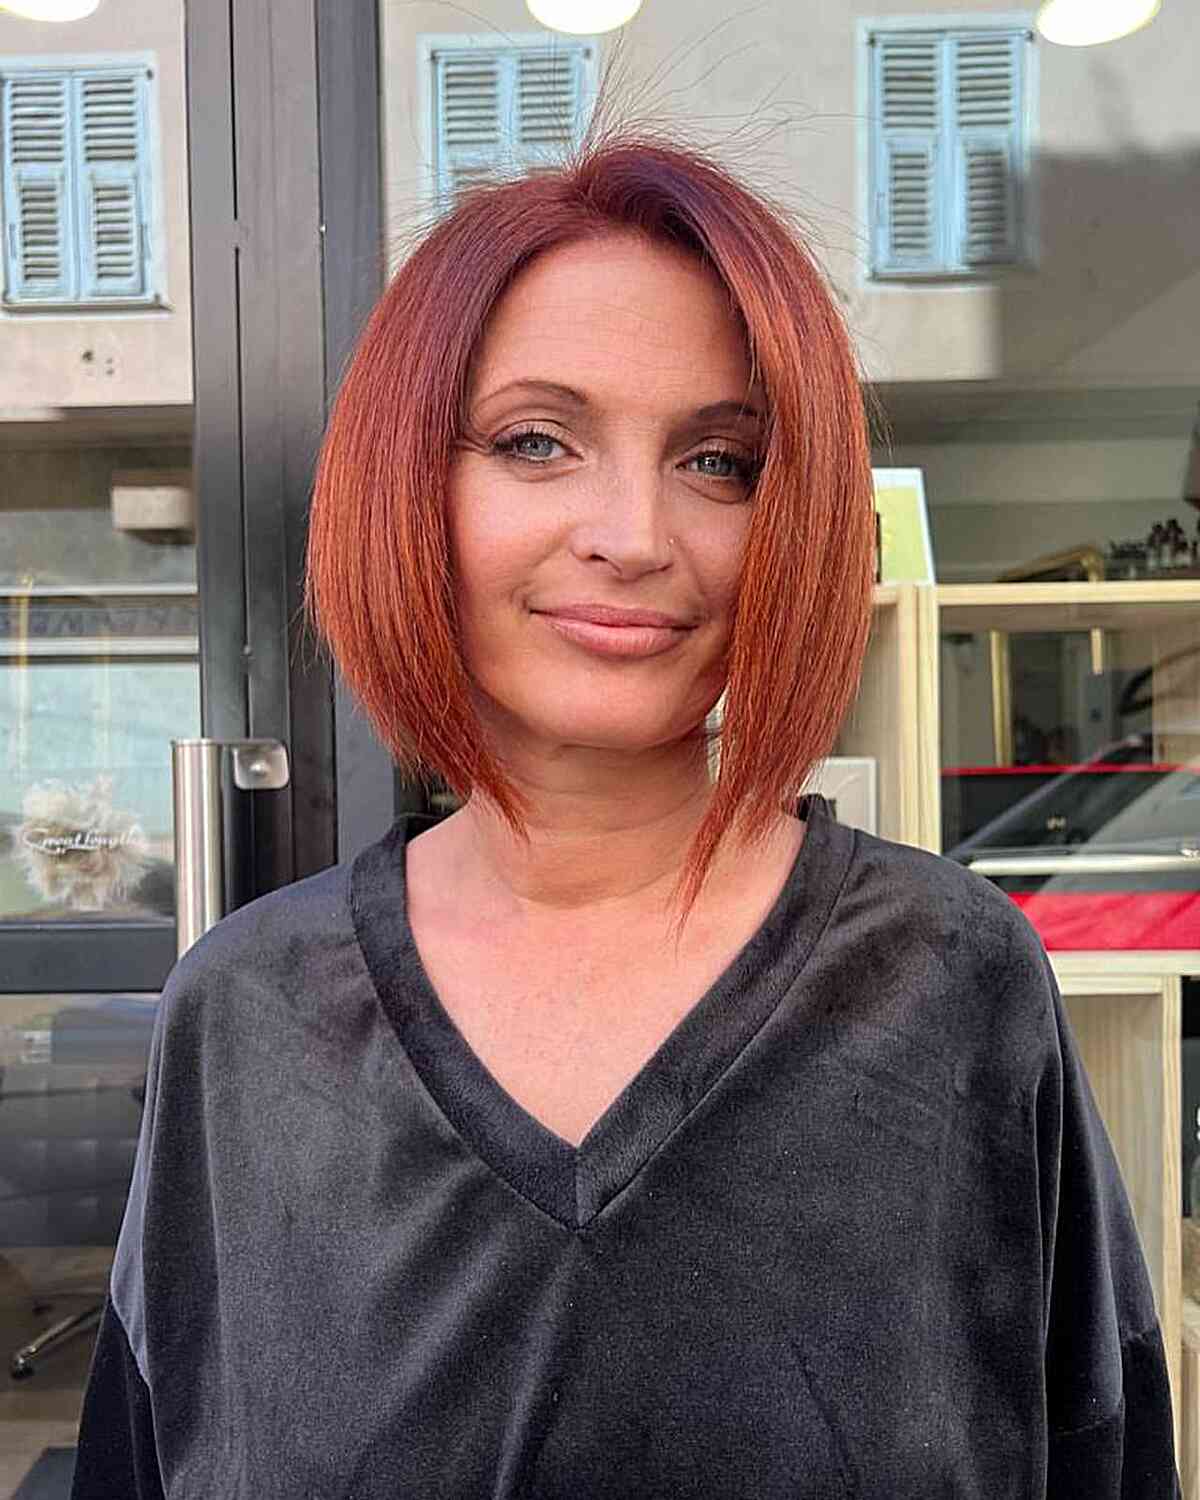 Dark Red Slightly asymmetrical A-Line Bob Cut with a Side Part for a woman over 40